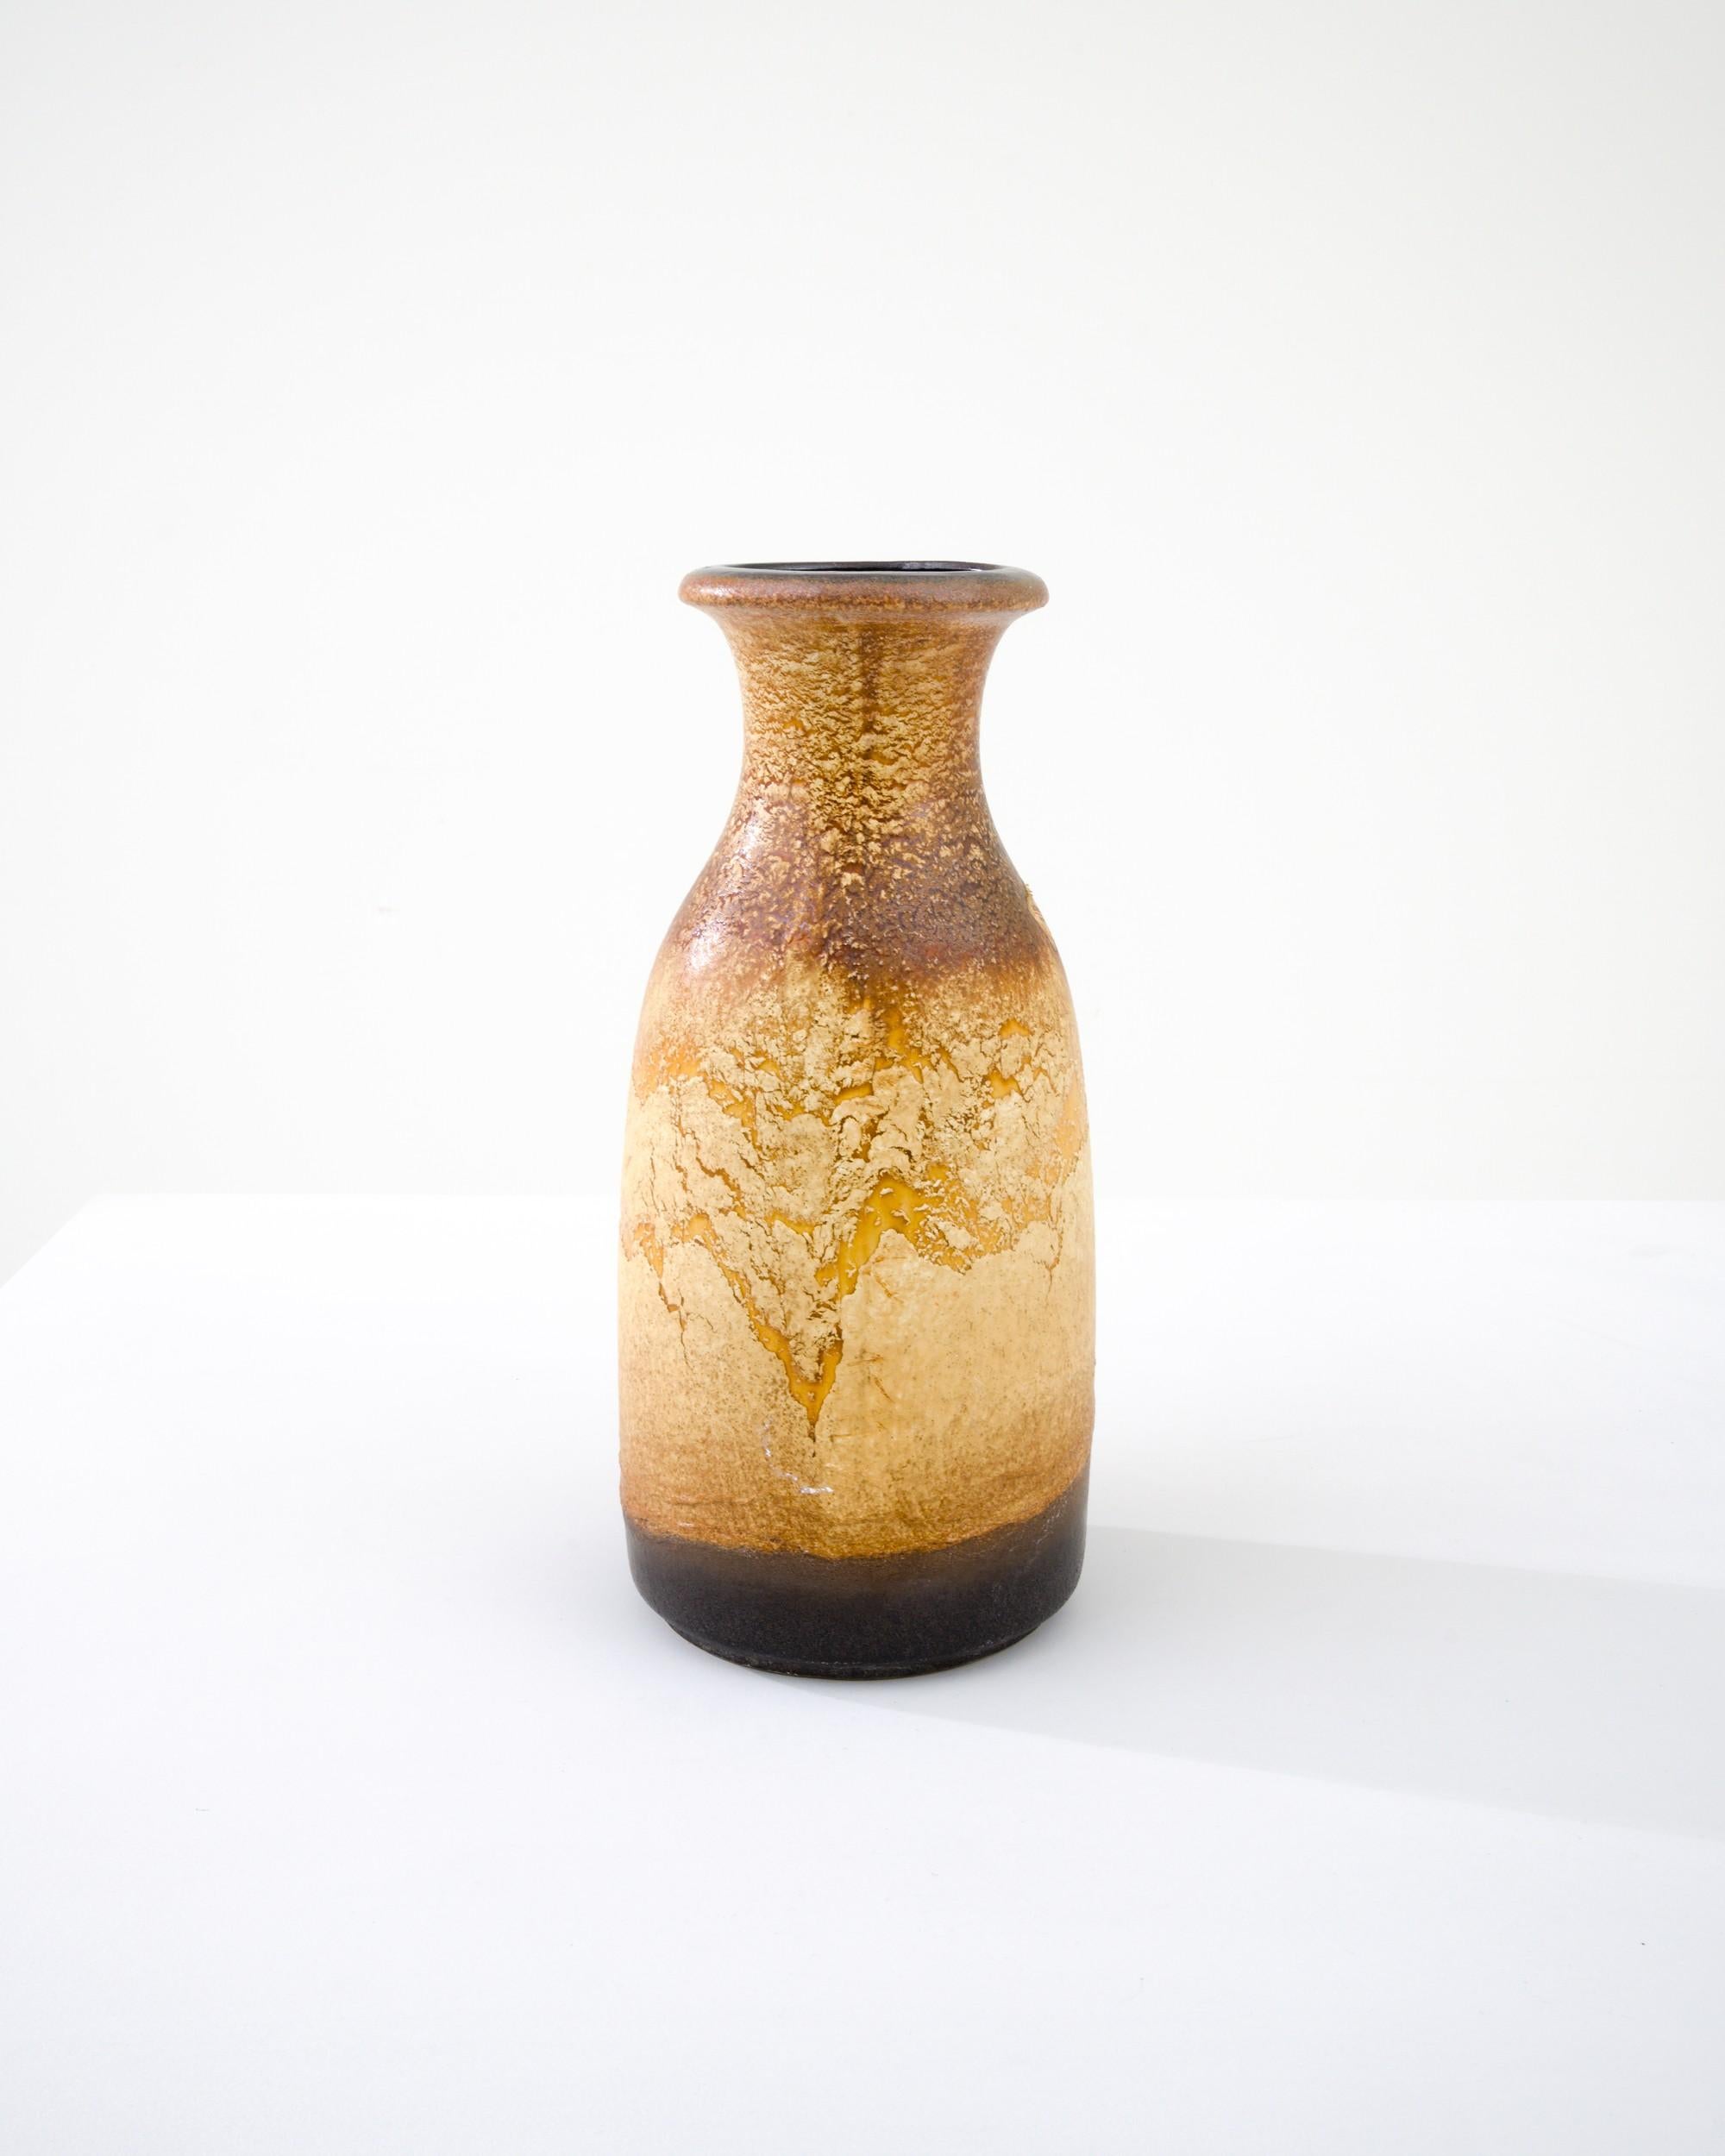 A ceramic vase from mid-20th century Germany. Neither large nor small, this studio made pot reflects the hand-held, and the handmade; the tactility of process and the artist's vision– realized on the potter’s wheel. Textured earth tones wrap the